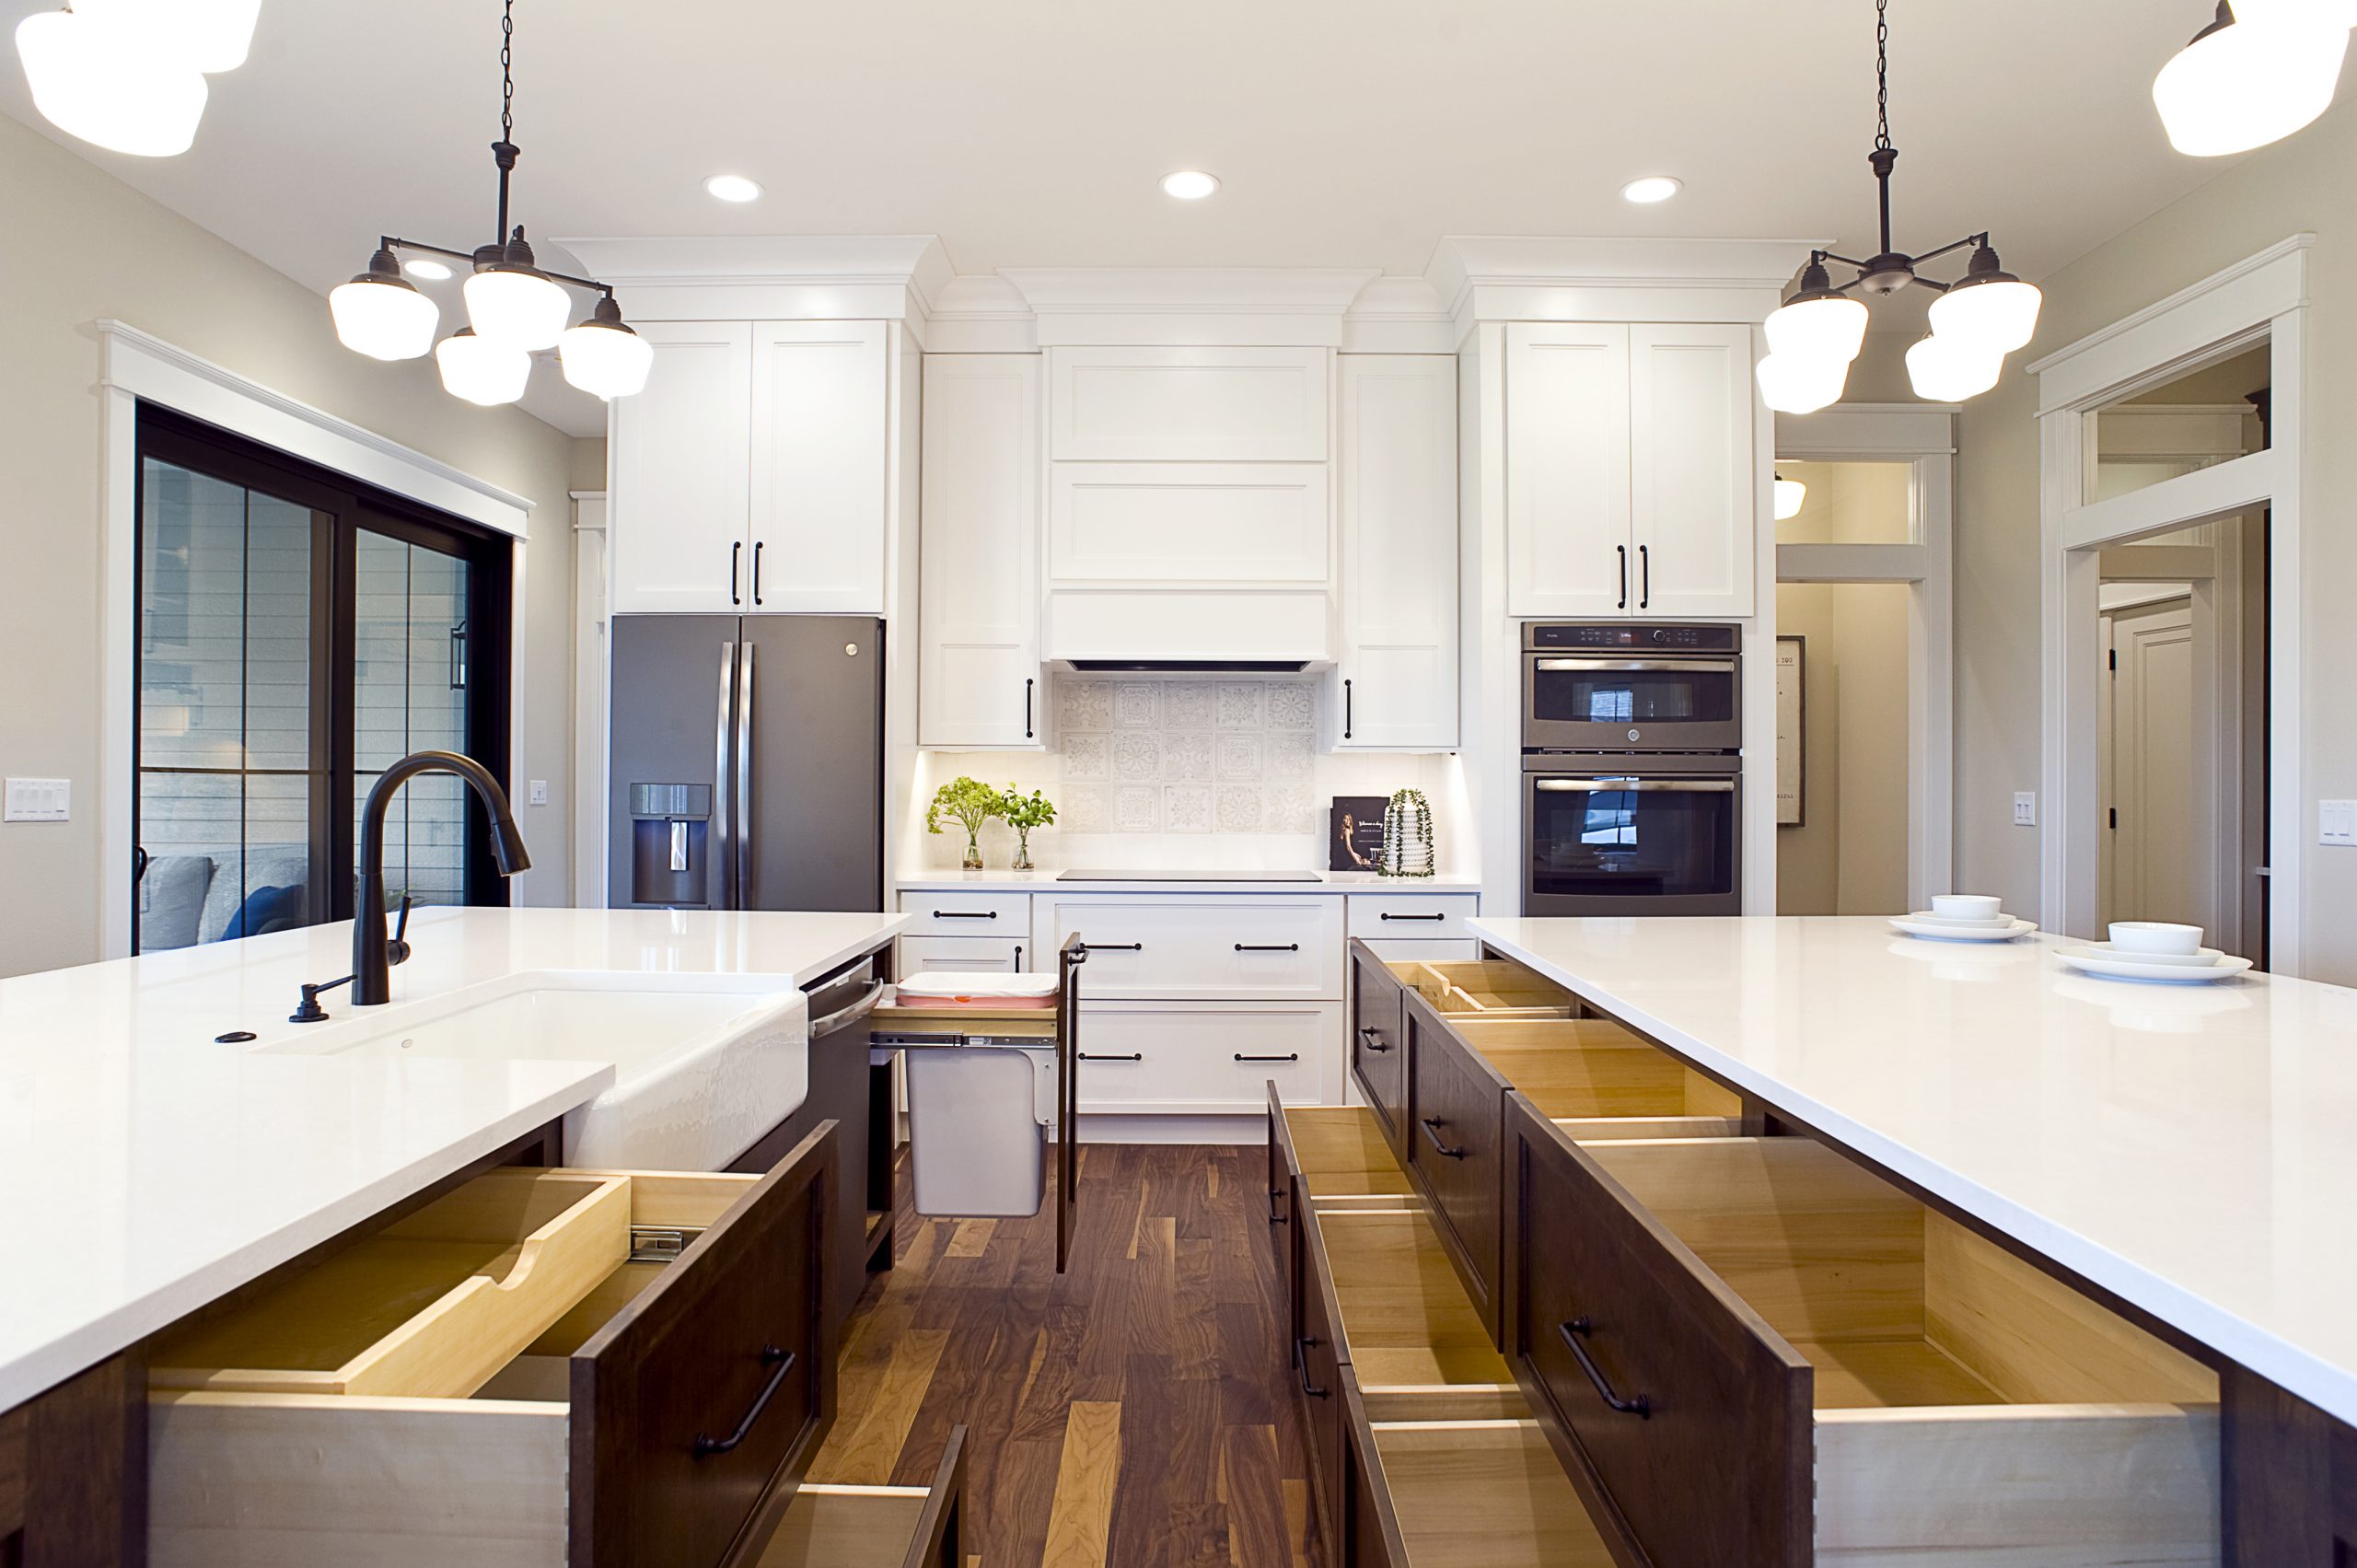 6 Must Have Kitchen Design Features - American Home